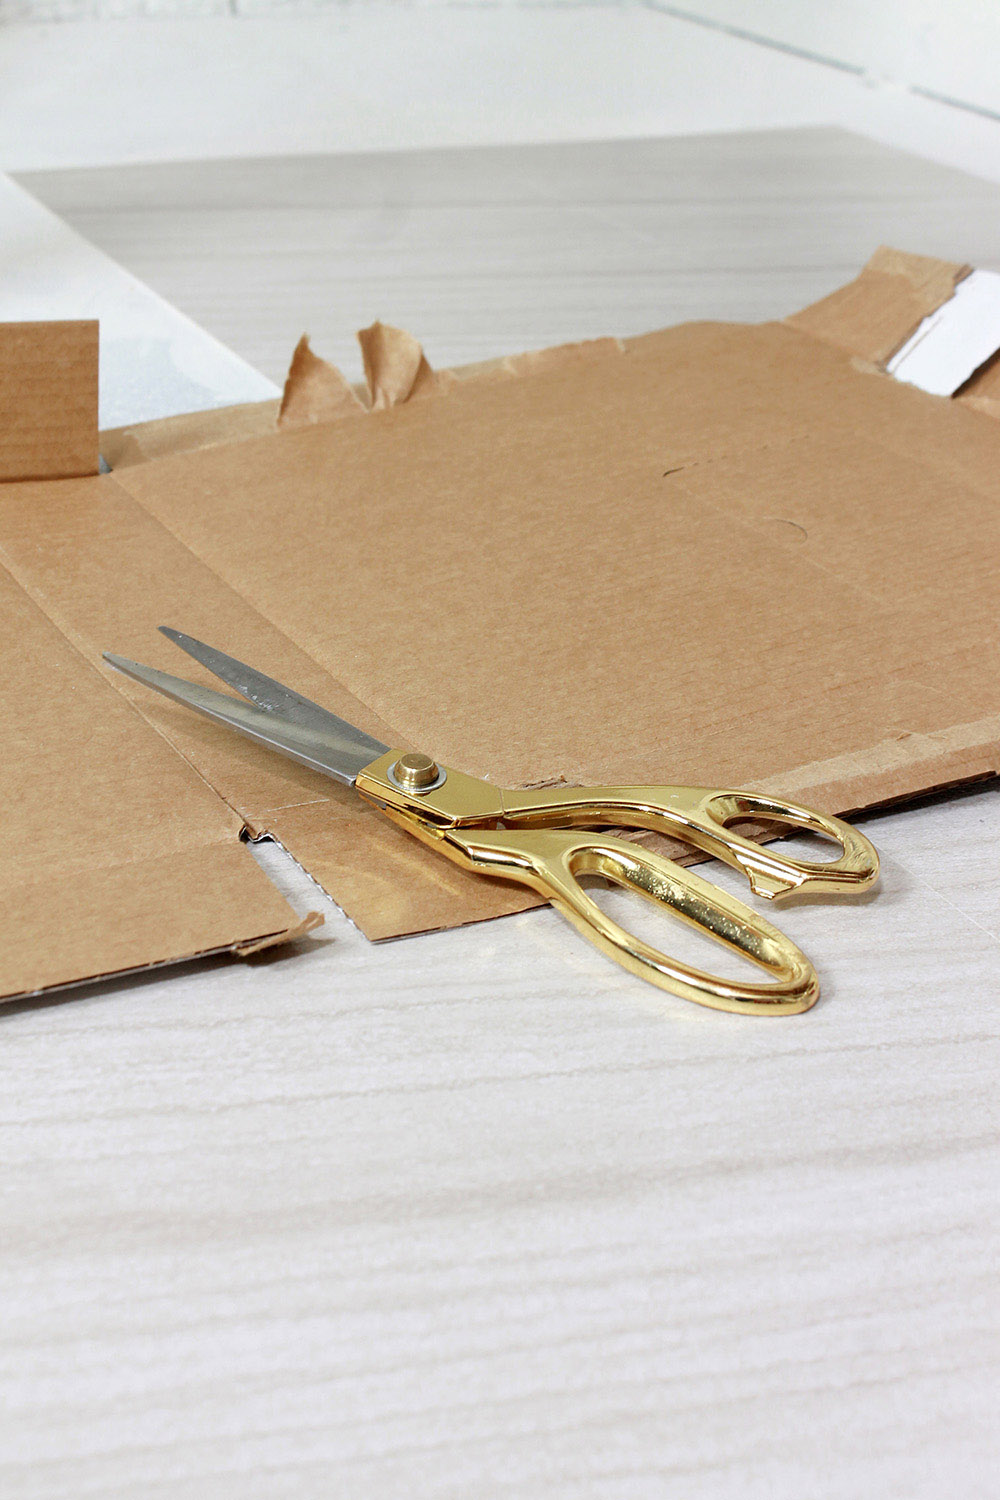 A pair of gold handled scissors on top of a piece of cardboard.